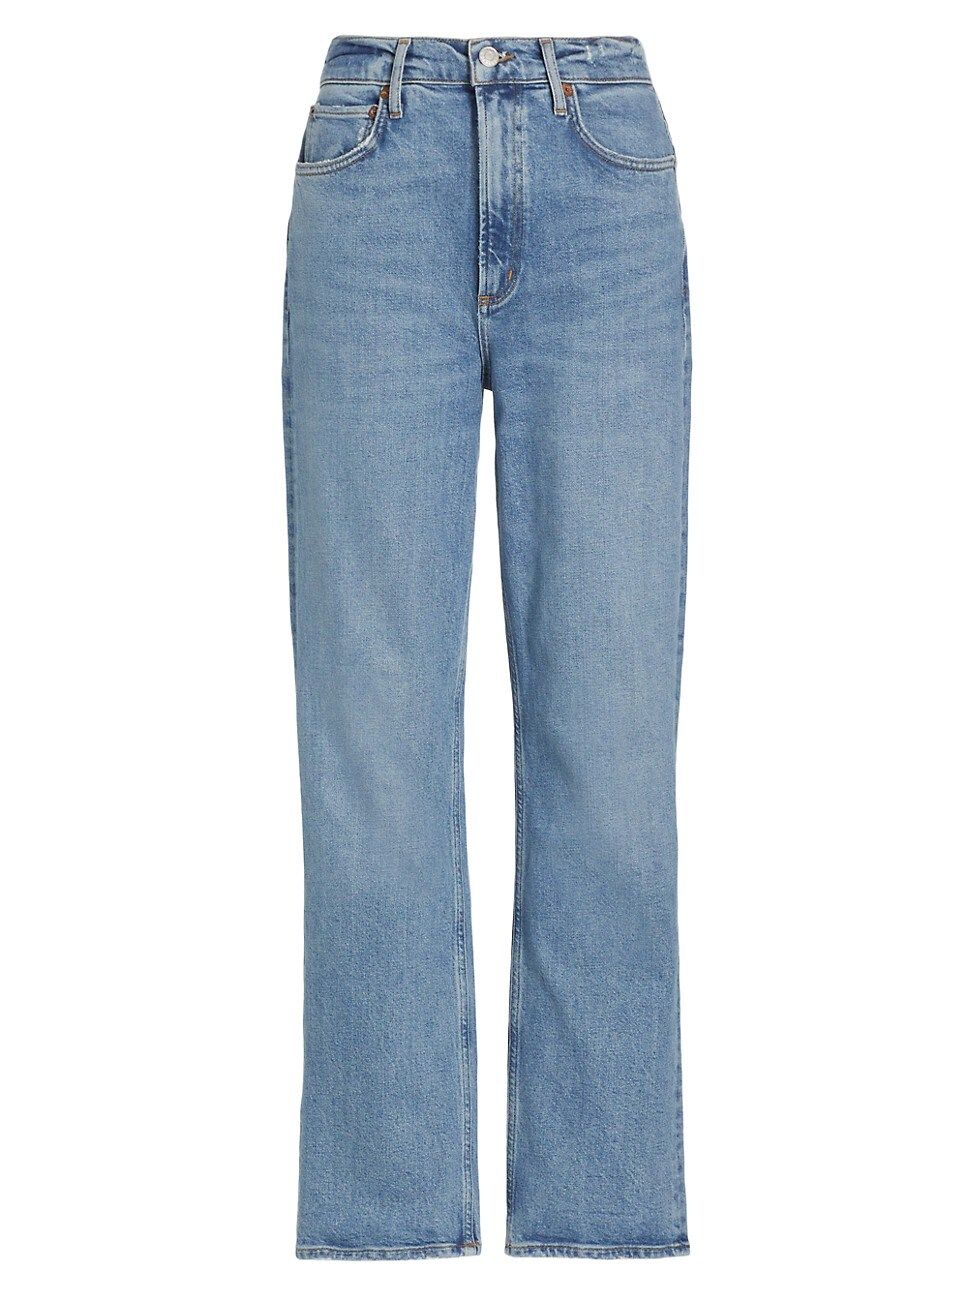 '90s Distressed Ankle-Crop Jeans | Saks Fifth Avenue